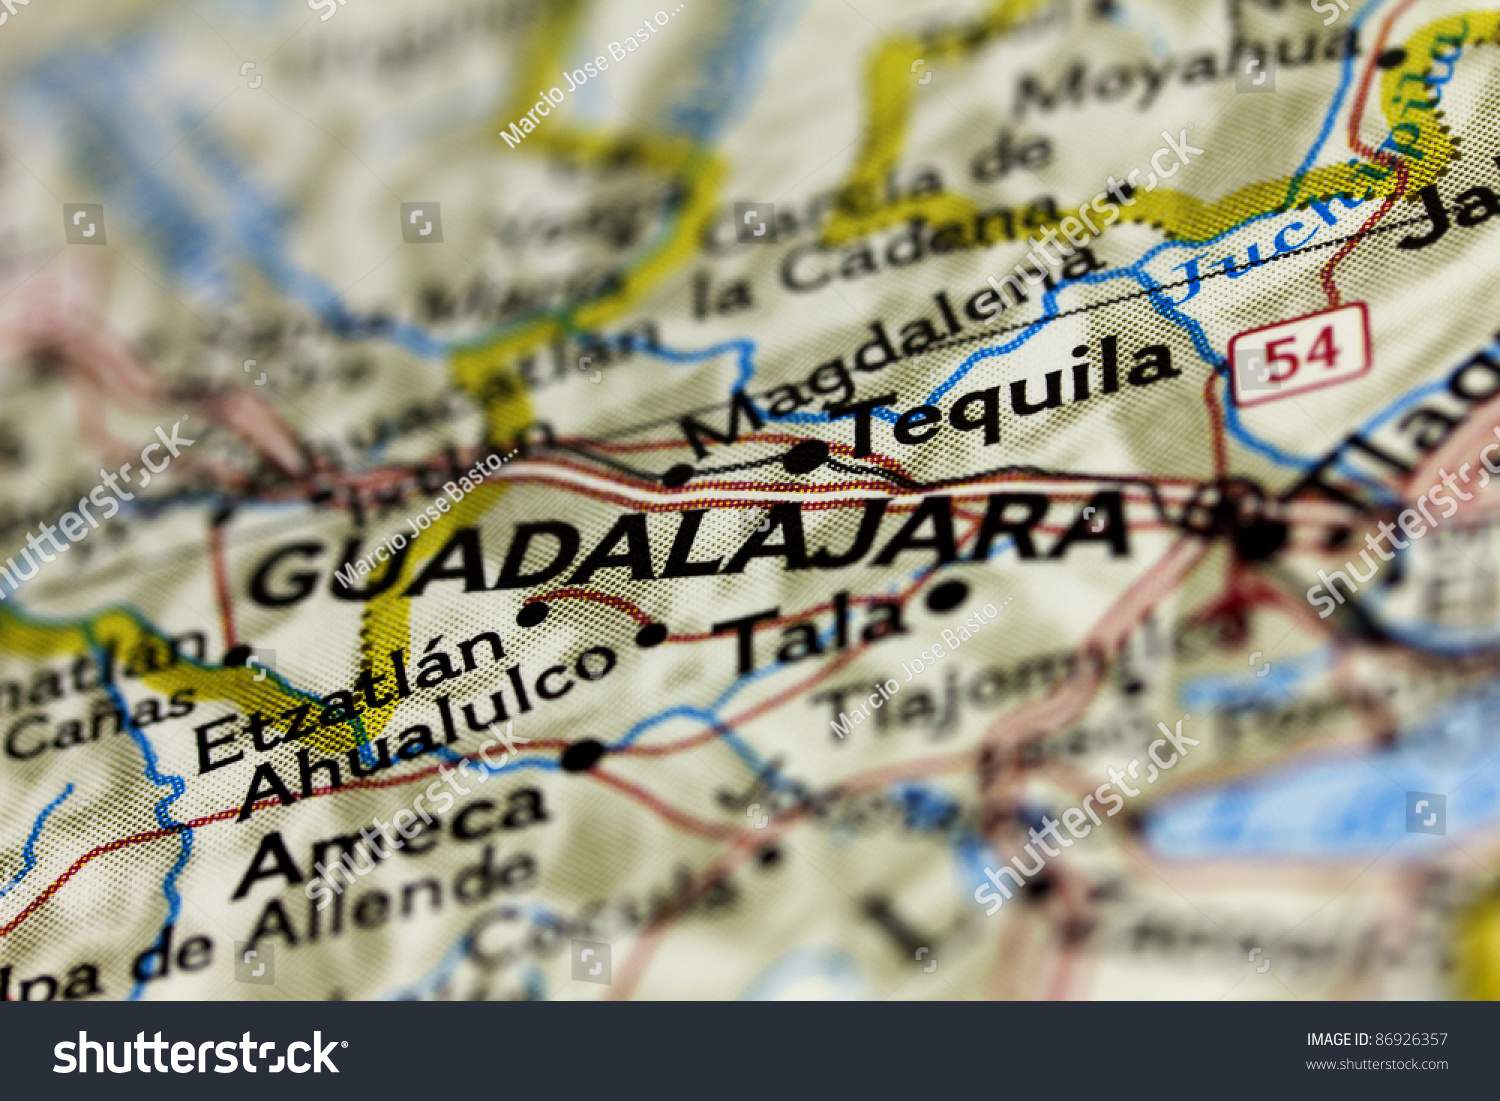 Stock Photo Guadalajara In Mexico On The Map 86926357 